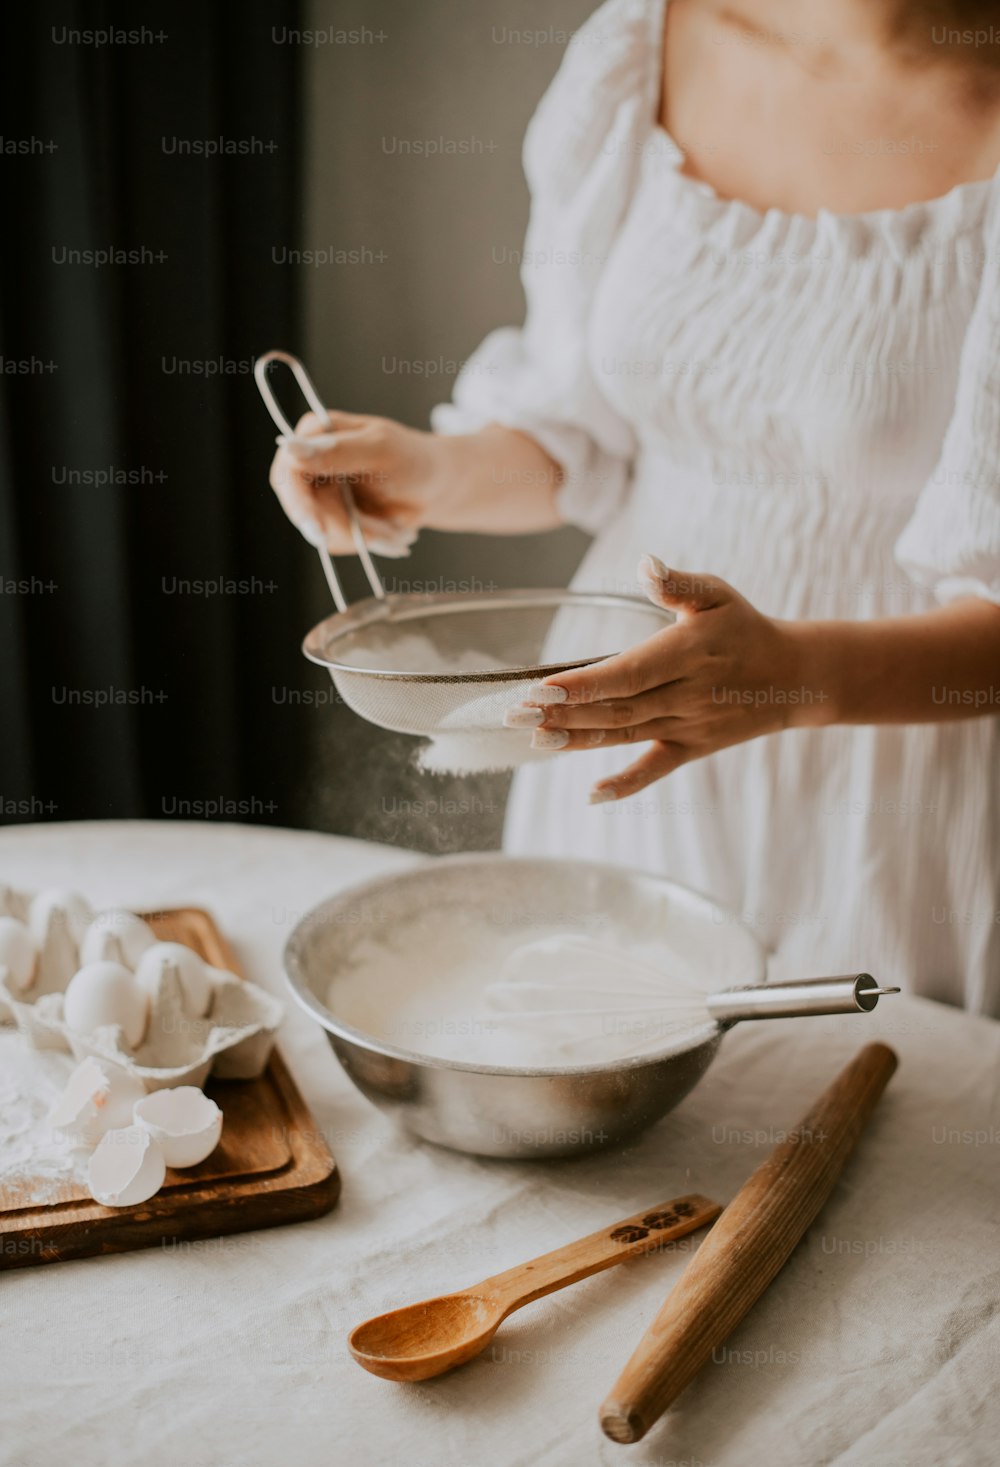 a woman in a white dress mixing ingredients in a bowl